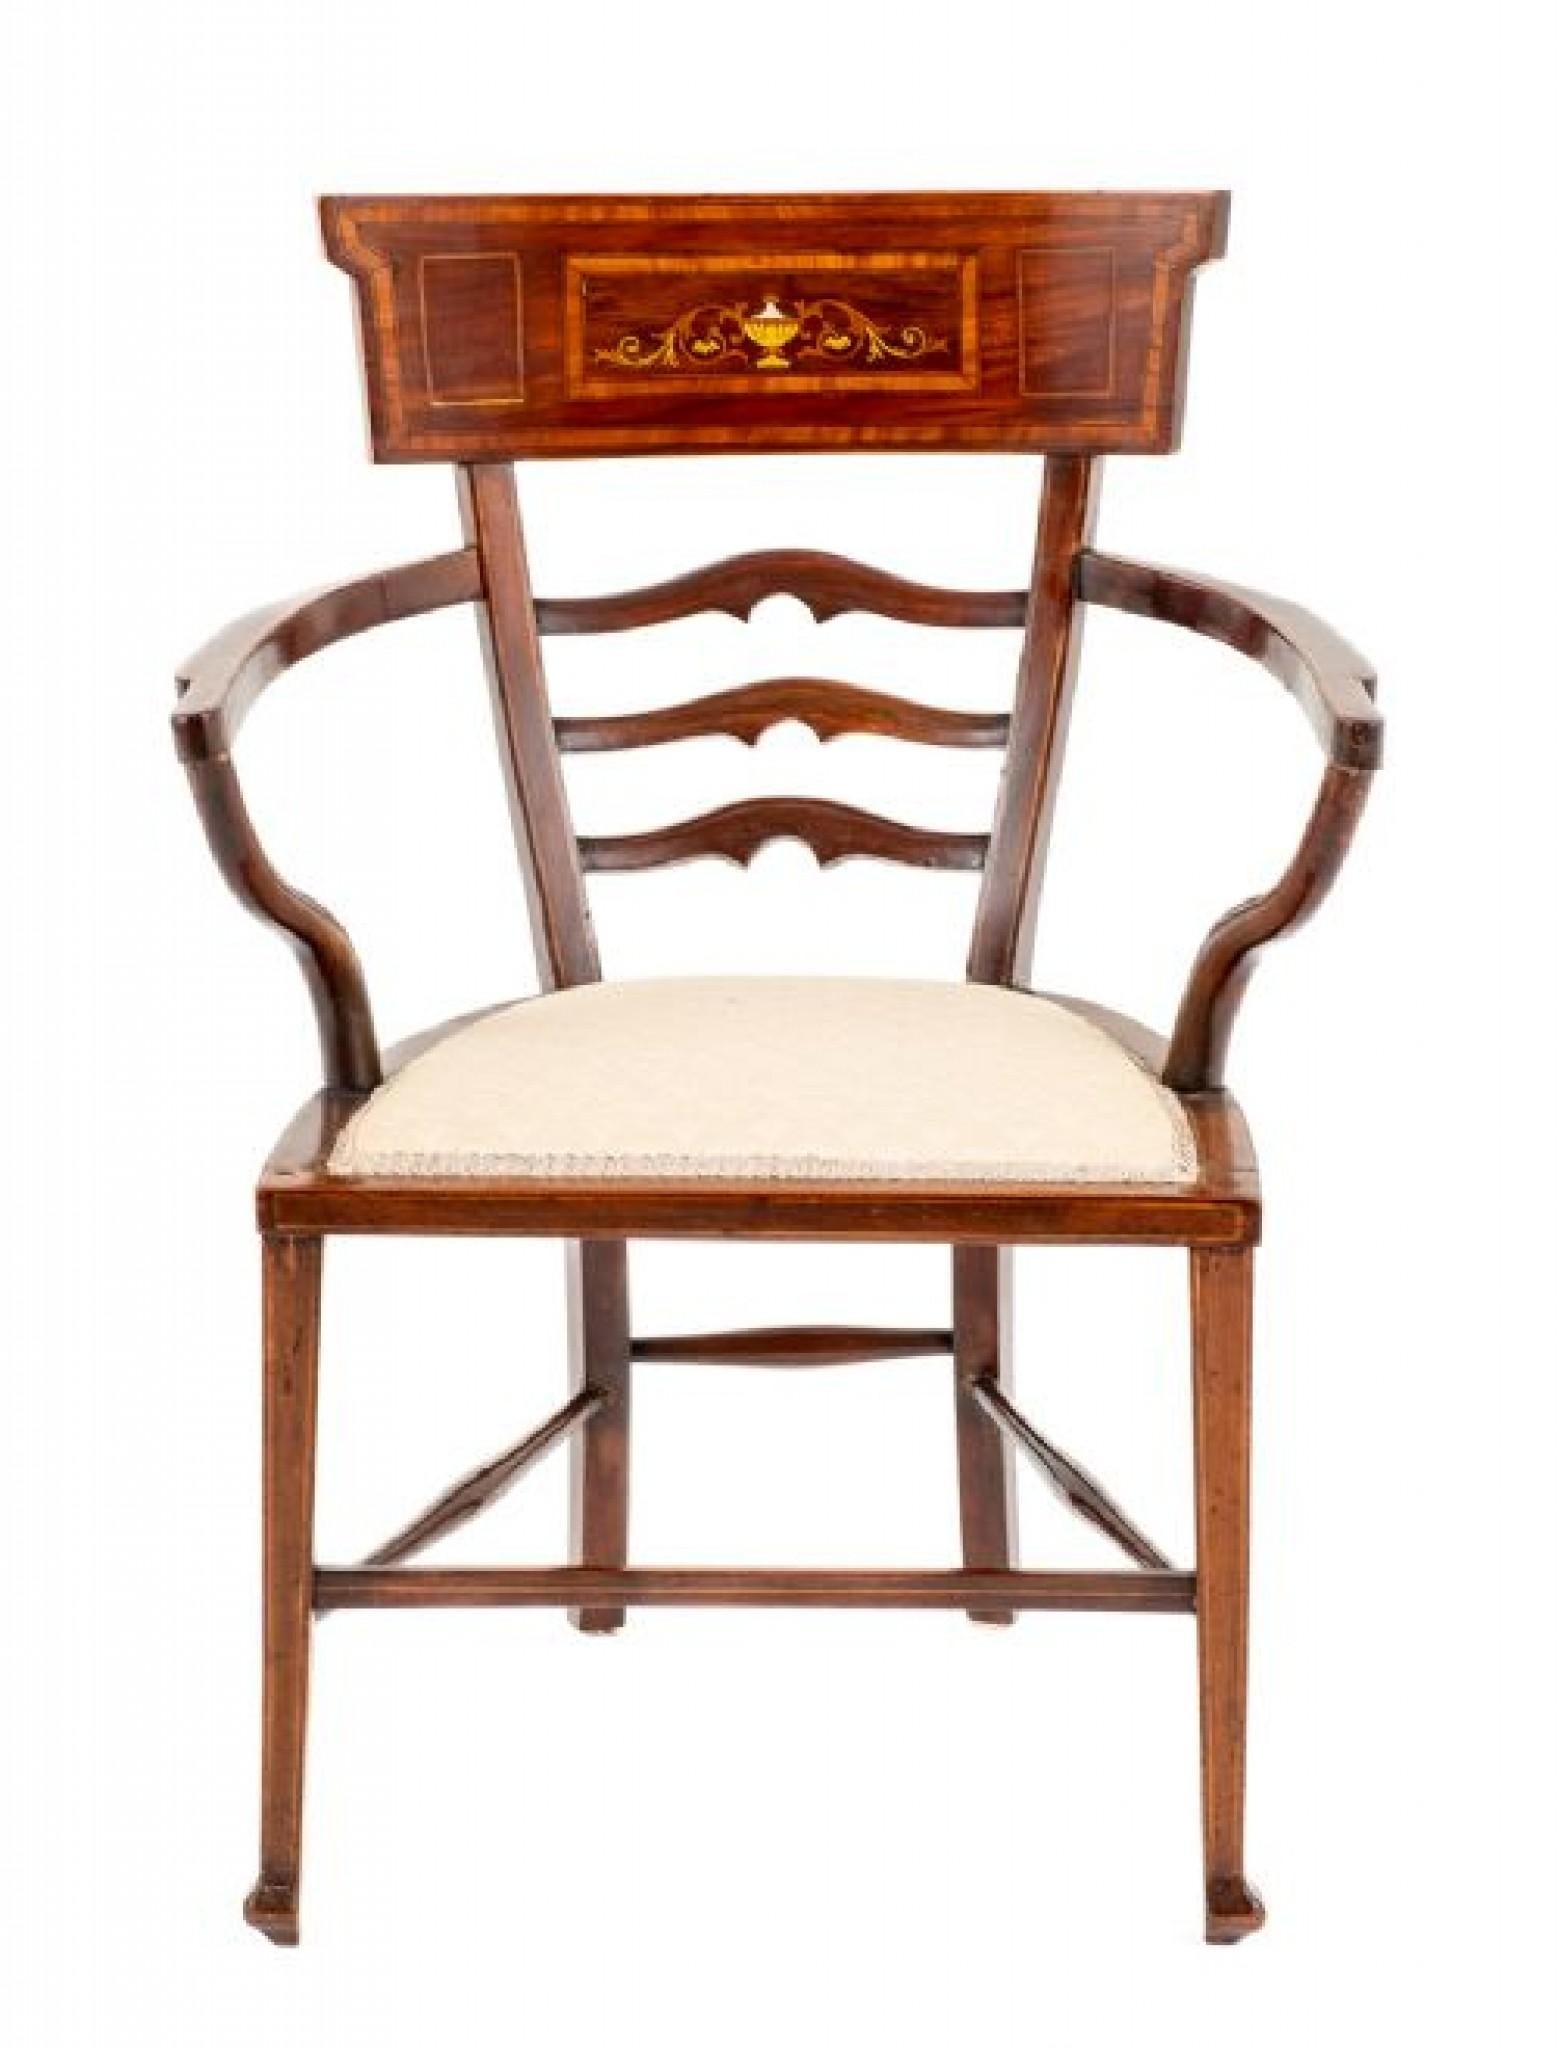 Sheraton Revival Open Arm Chair.
Circa 1890
This Pretty Chair Being of a Rather Unusual Design.
Raised Upon Tapered Front Legs and Swept Back Legs with Turned Stretchers.
The Chair Features Shaped Arm Supports, Shaped Rails and a Deep Top Rail With